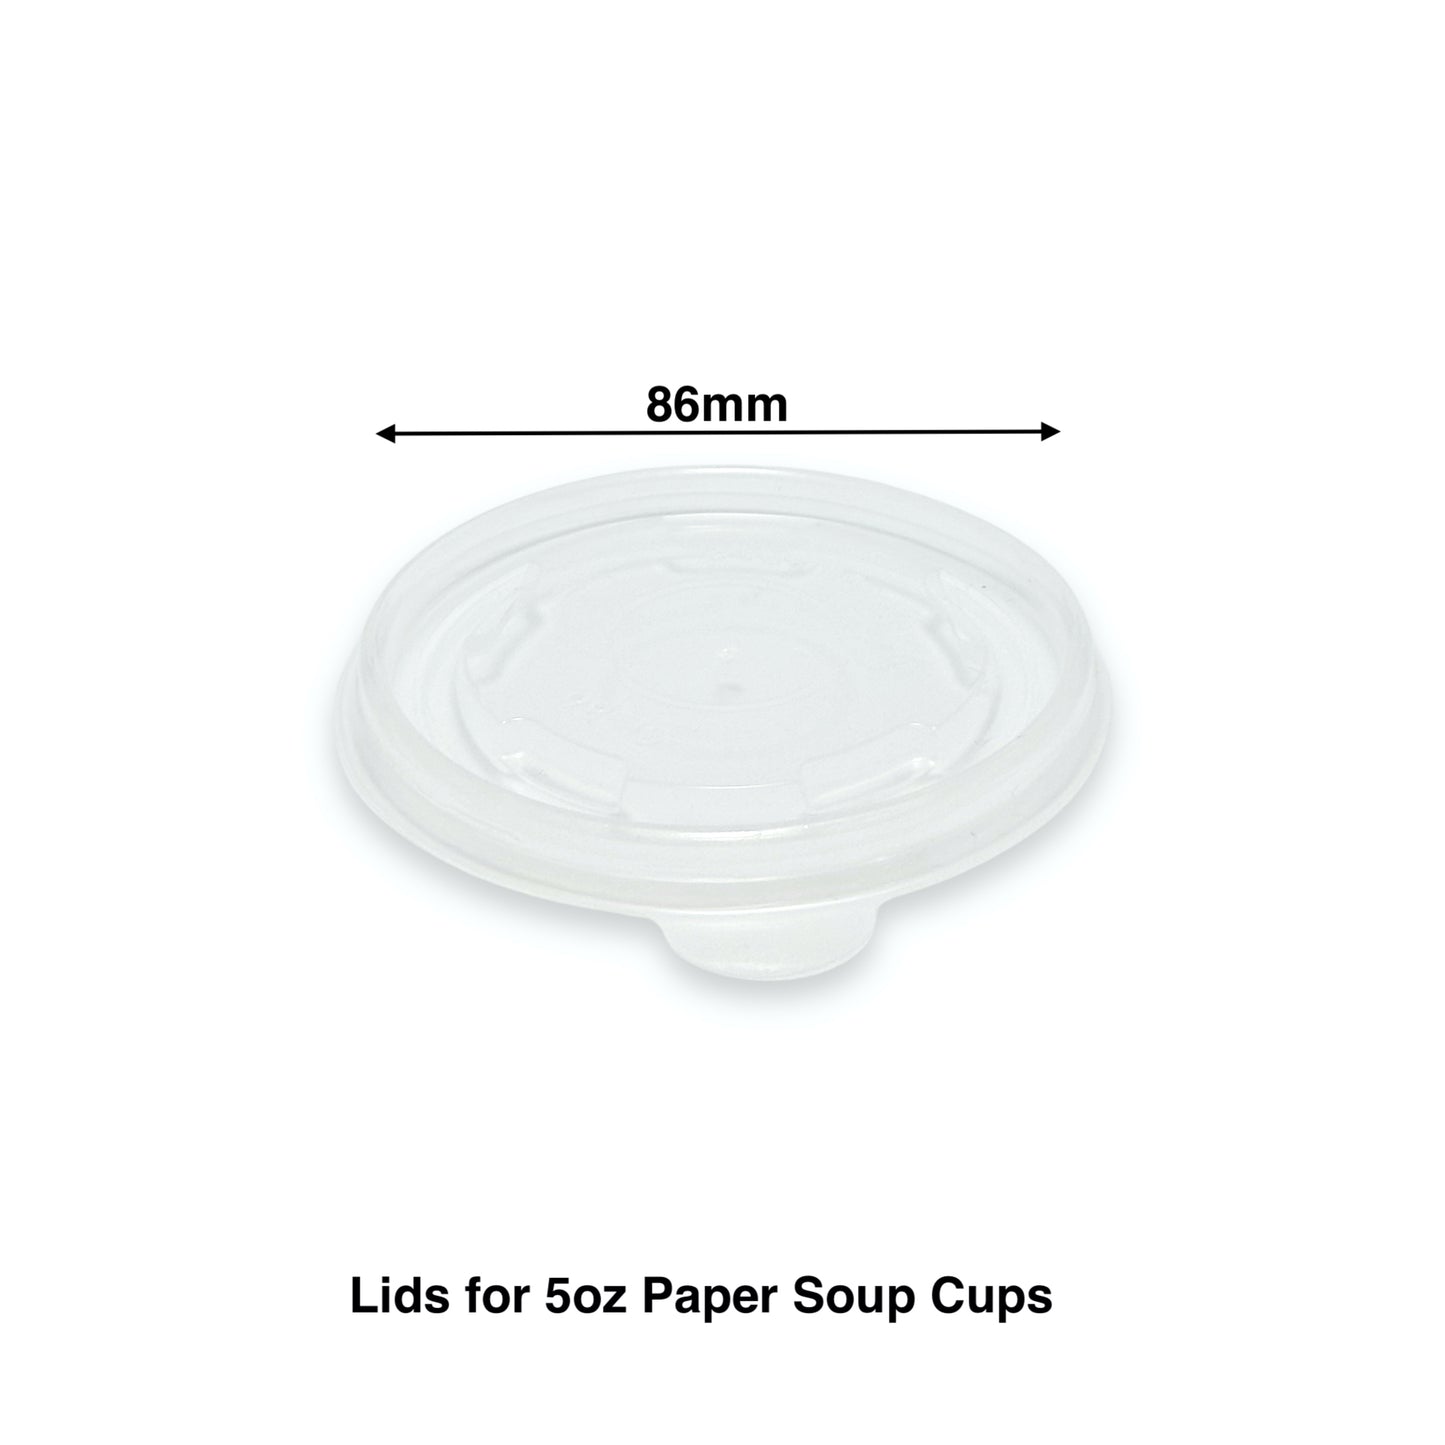 KIS-SL86G | 86mm PP Lid for 5oz Paper Soup Container; From $0.037/pc